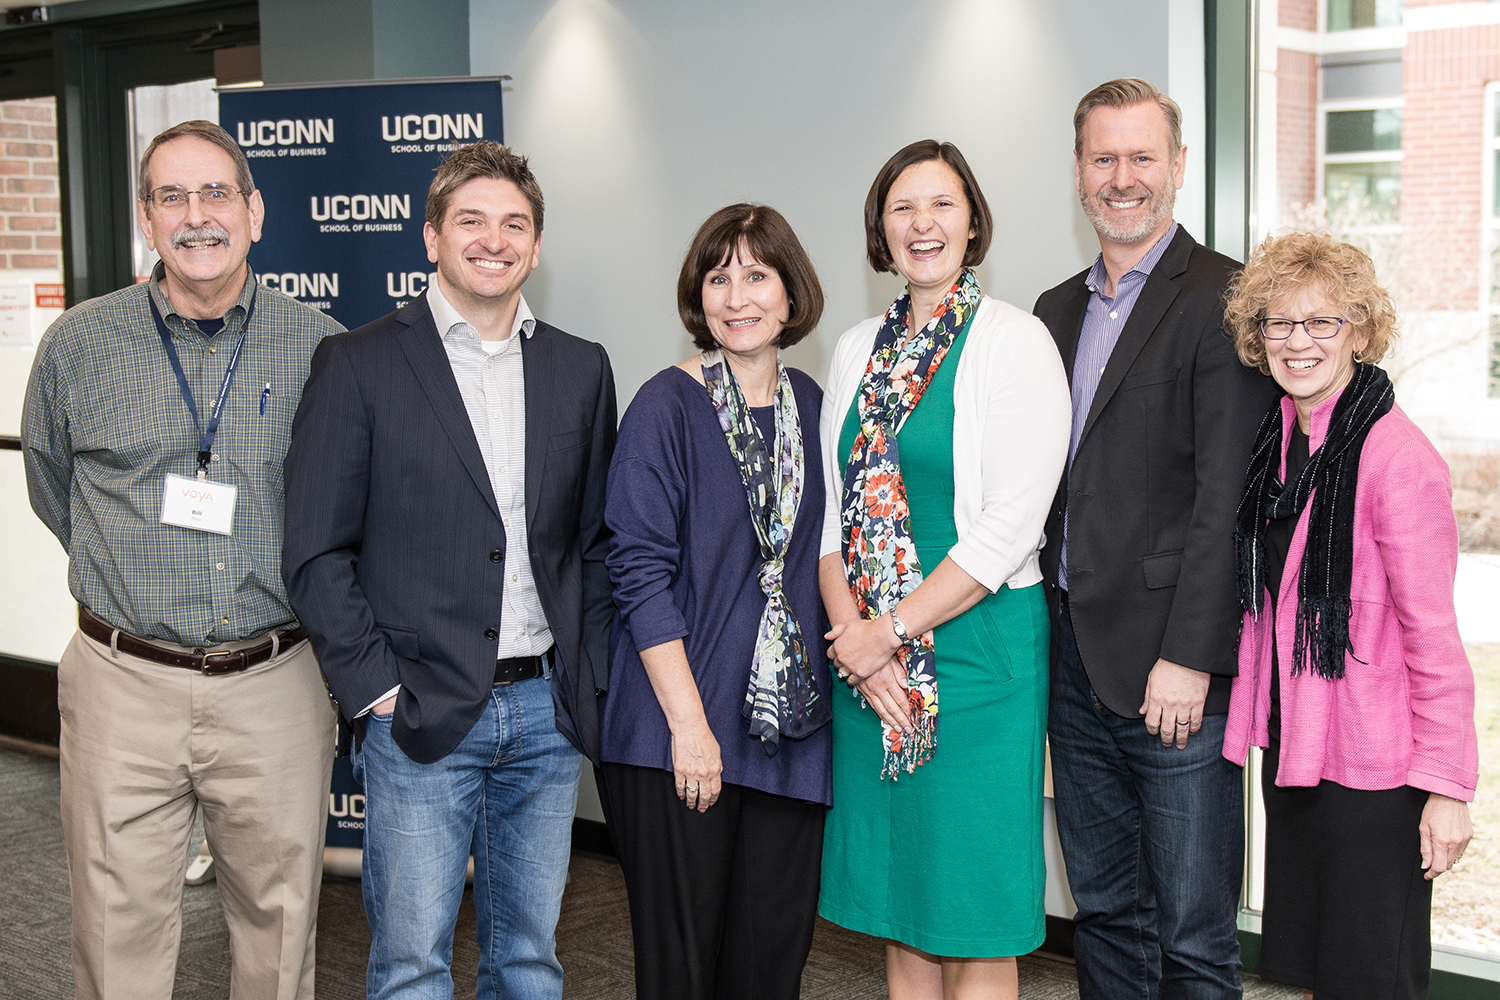 From left: Bill Ross, Remi Trudel, Jennifer Escalas, Karen Winterich, Mark Forehand, and Robin Coulter (Nathan Oldham/UConn photo)